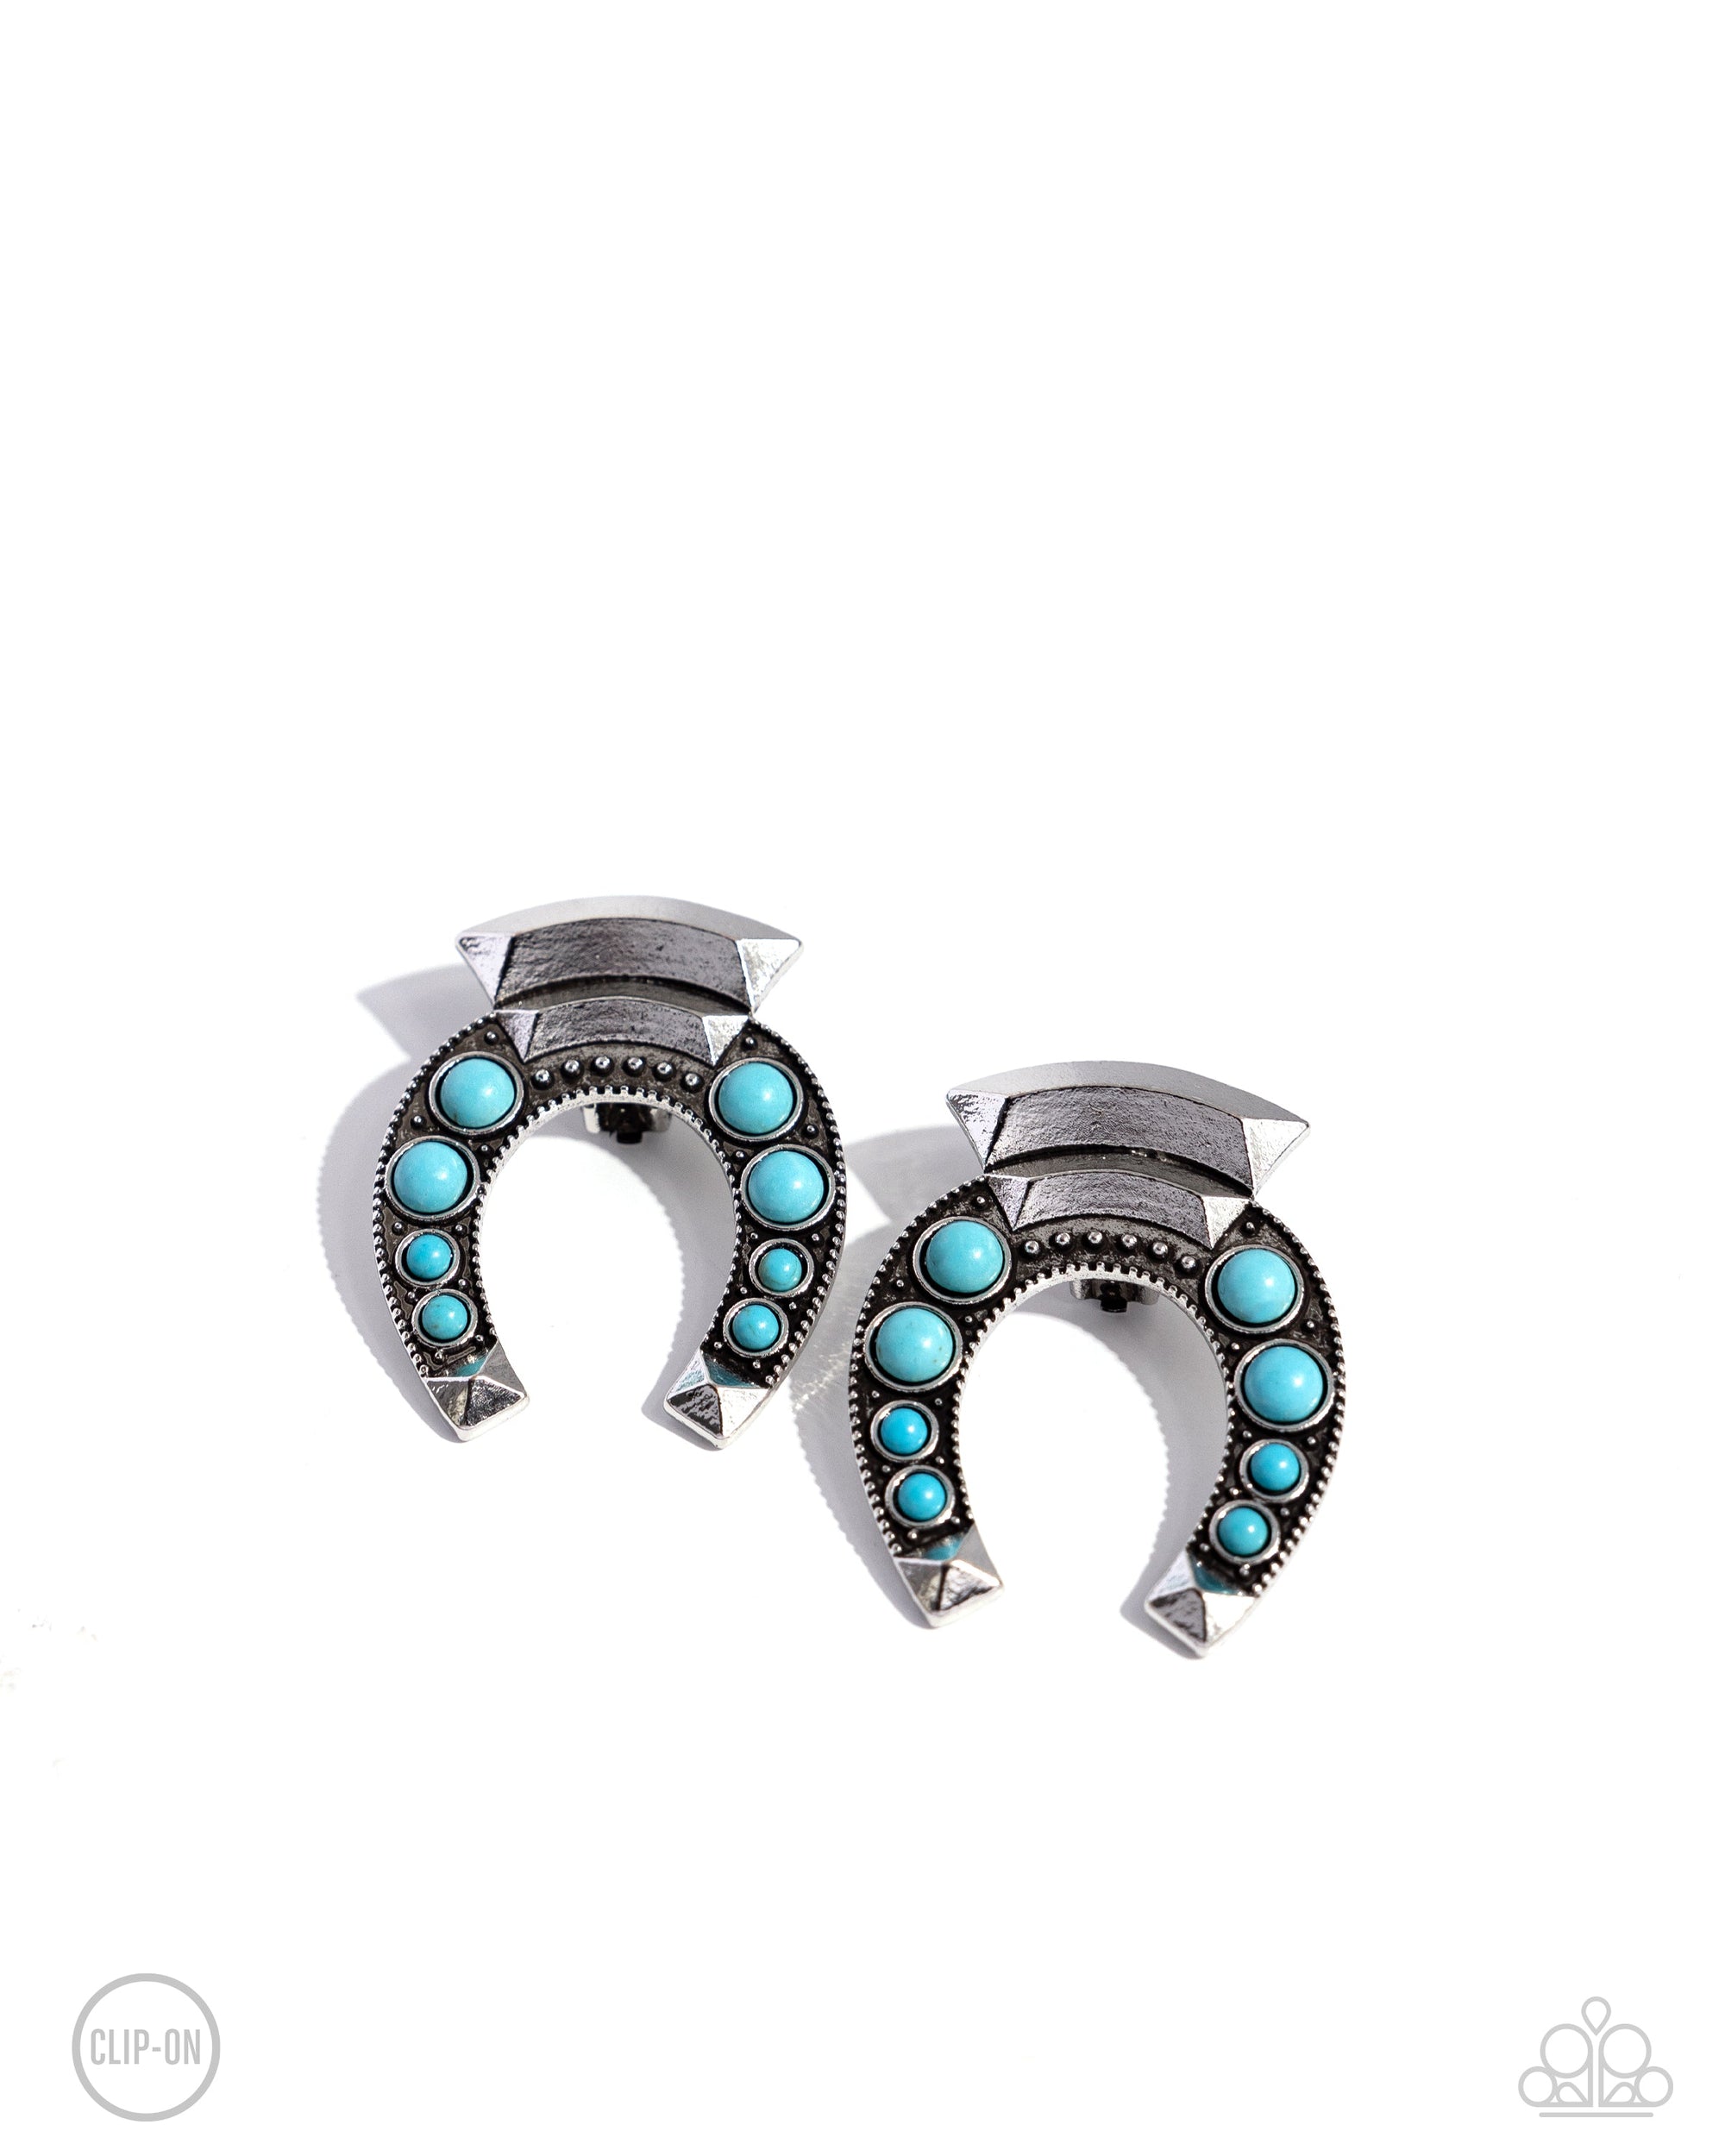 Harmonious Horseshoe Turquoise Blue Stone Clip-On Earrings - Paparazzi Accessories- lightbox - CarasShop.com - $5 Jewelry by Cara Jewels